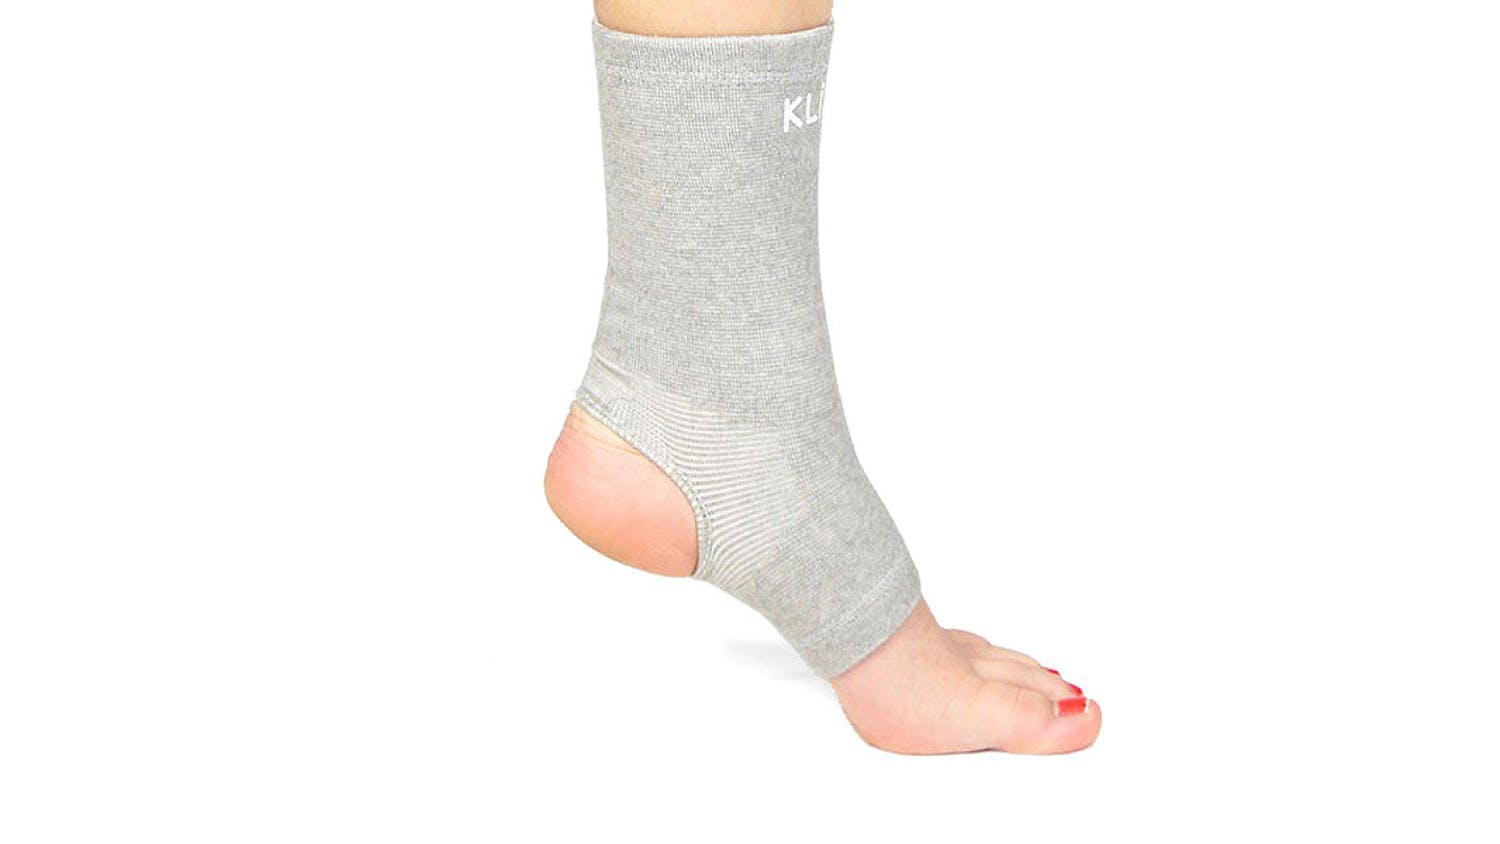 Powertrain Ankle Compression Support Bandage Wrap